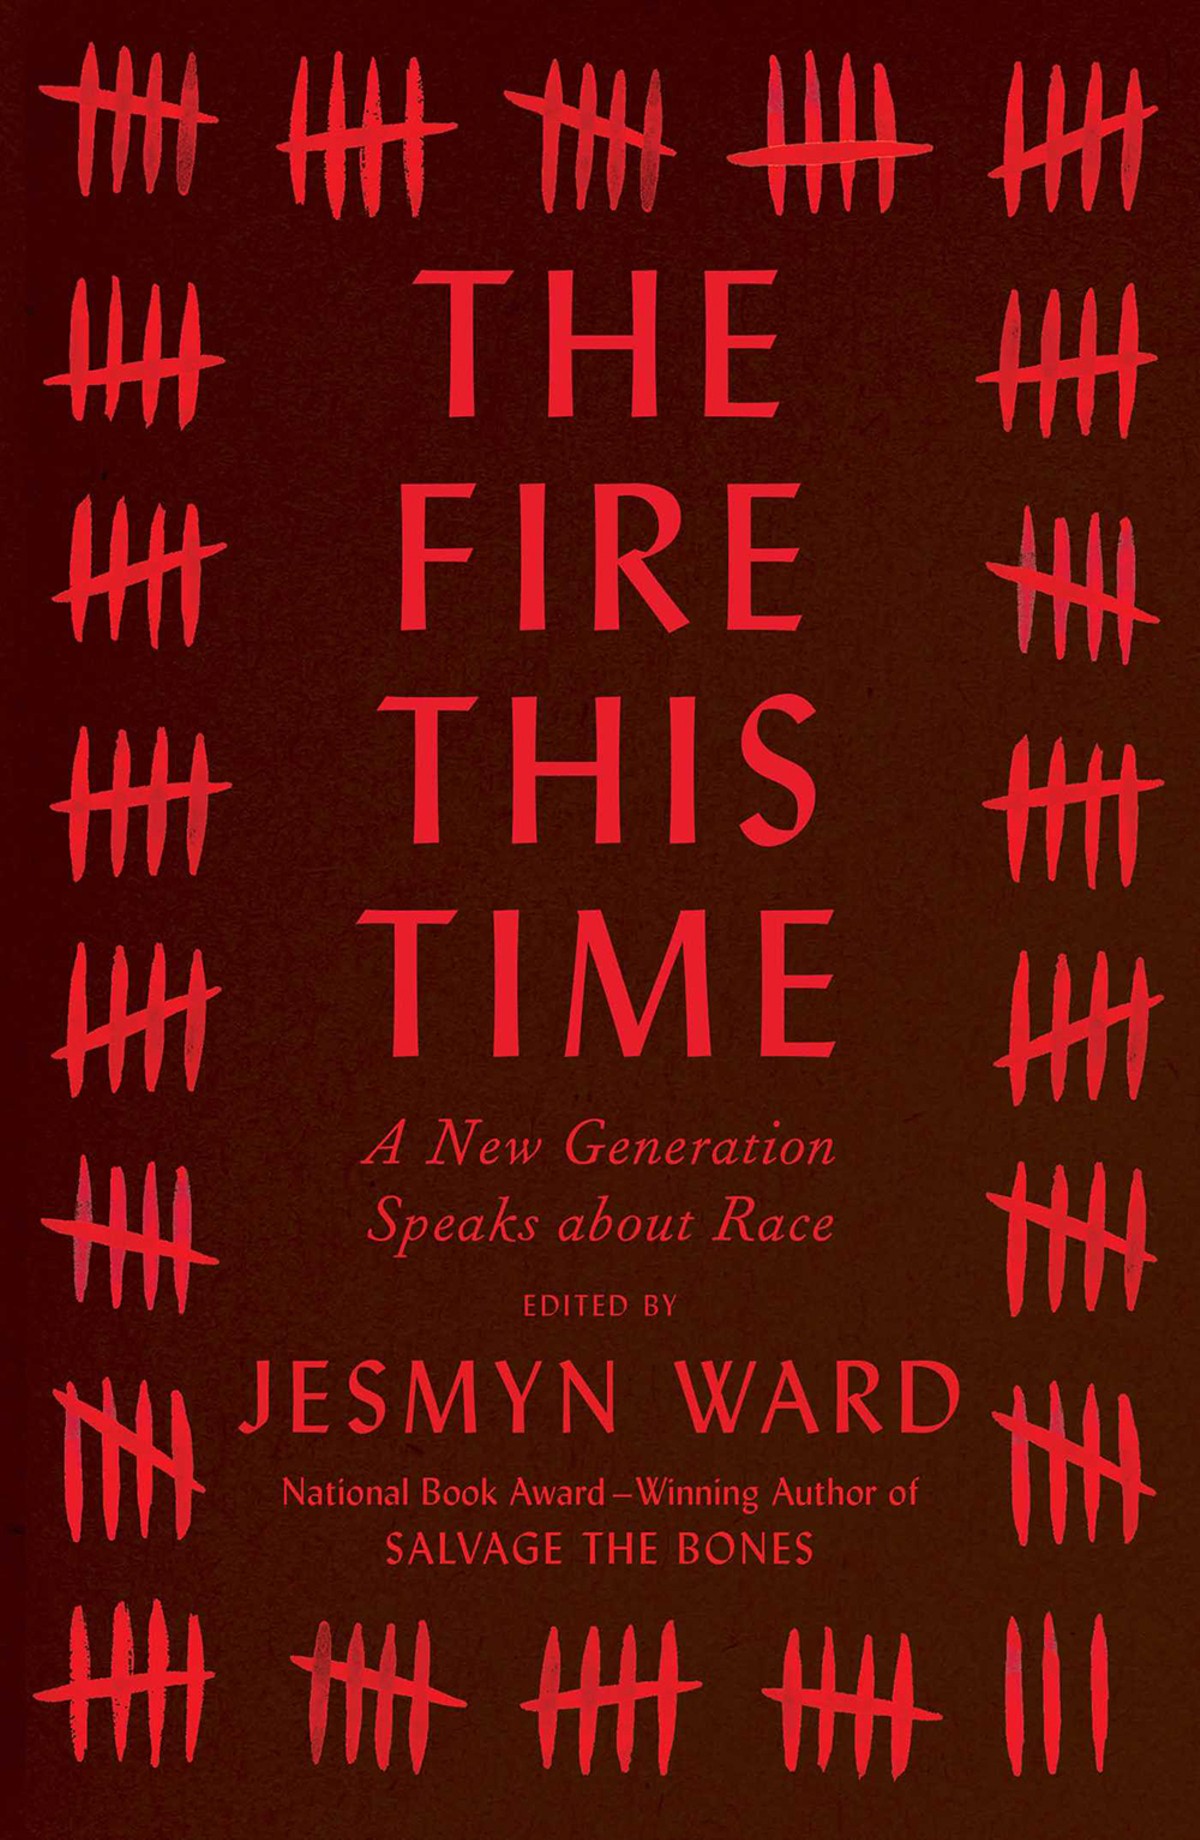 The Fire This Time edited by Jesmyn Ward